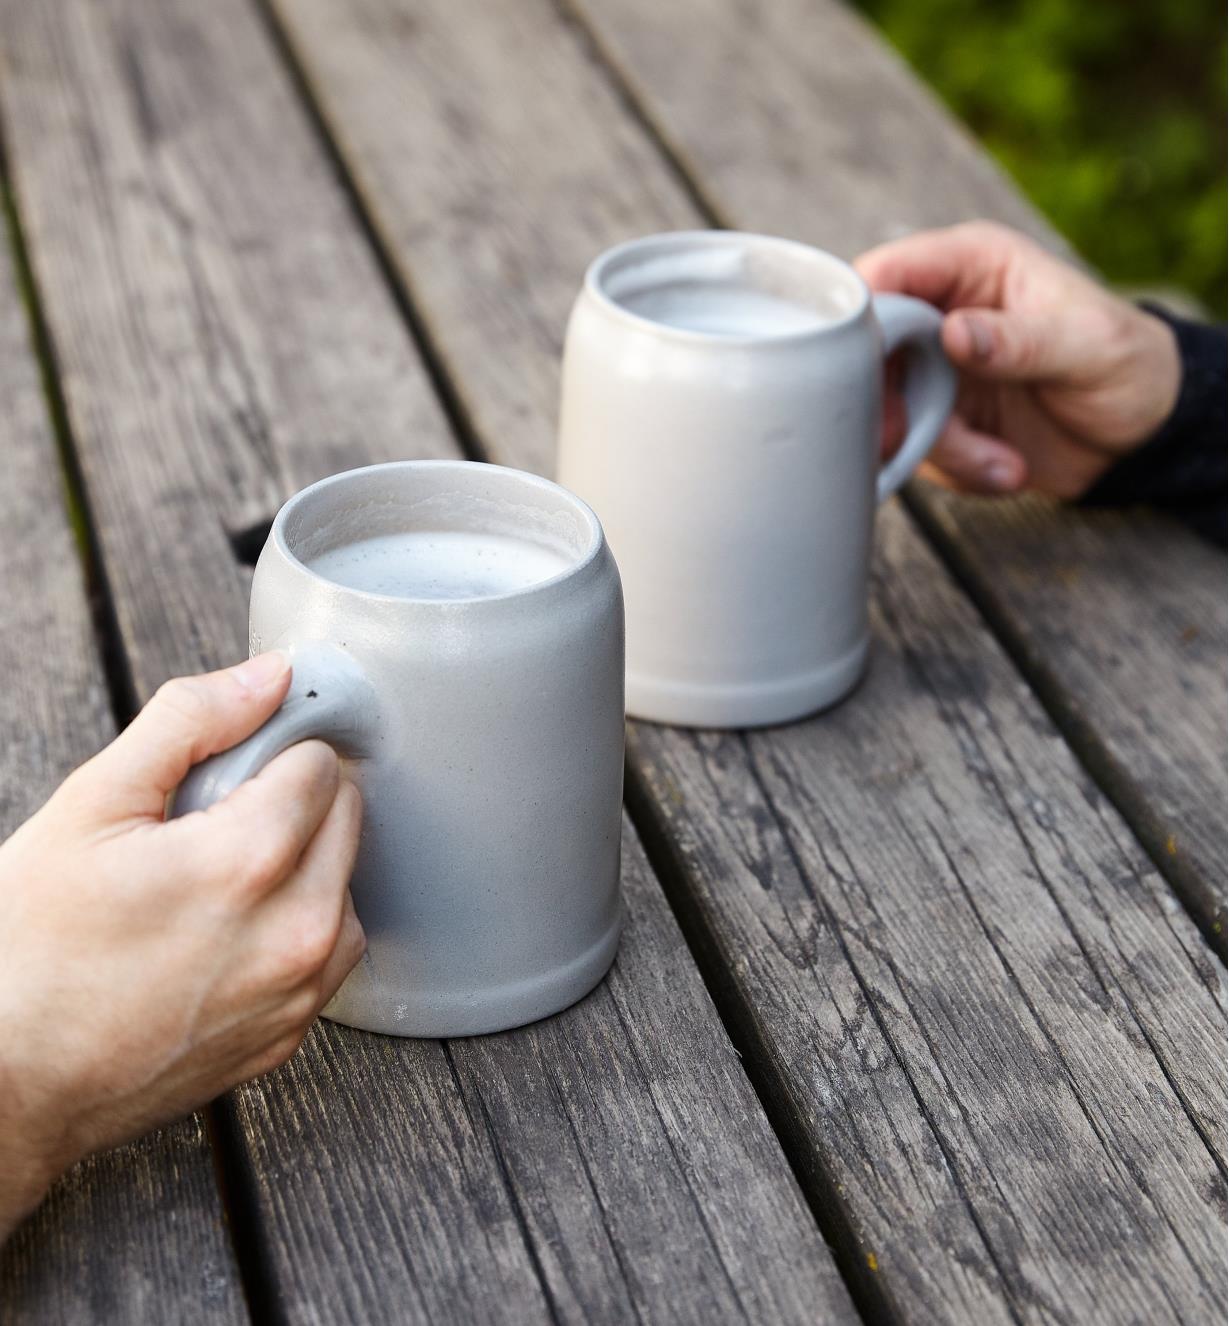 Two people hold Keferloher Beer Steins on an outdoor table